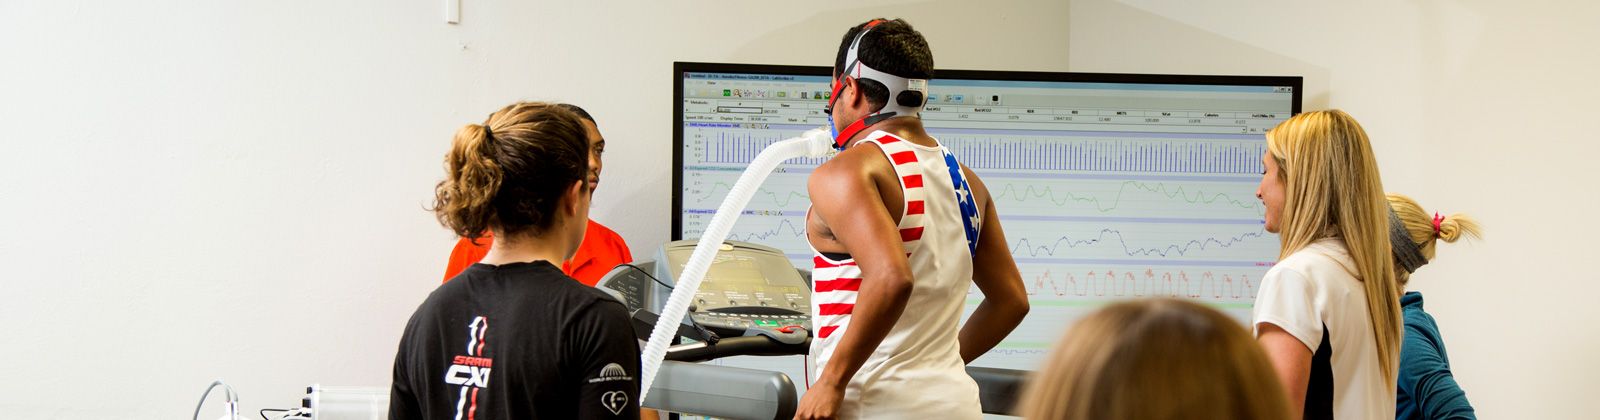 exercise-science-keeping-athletes-safe